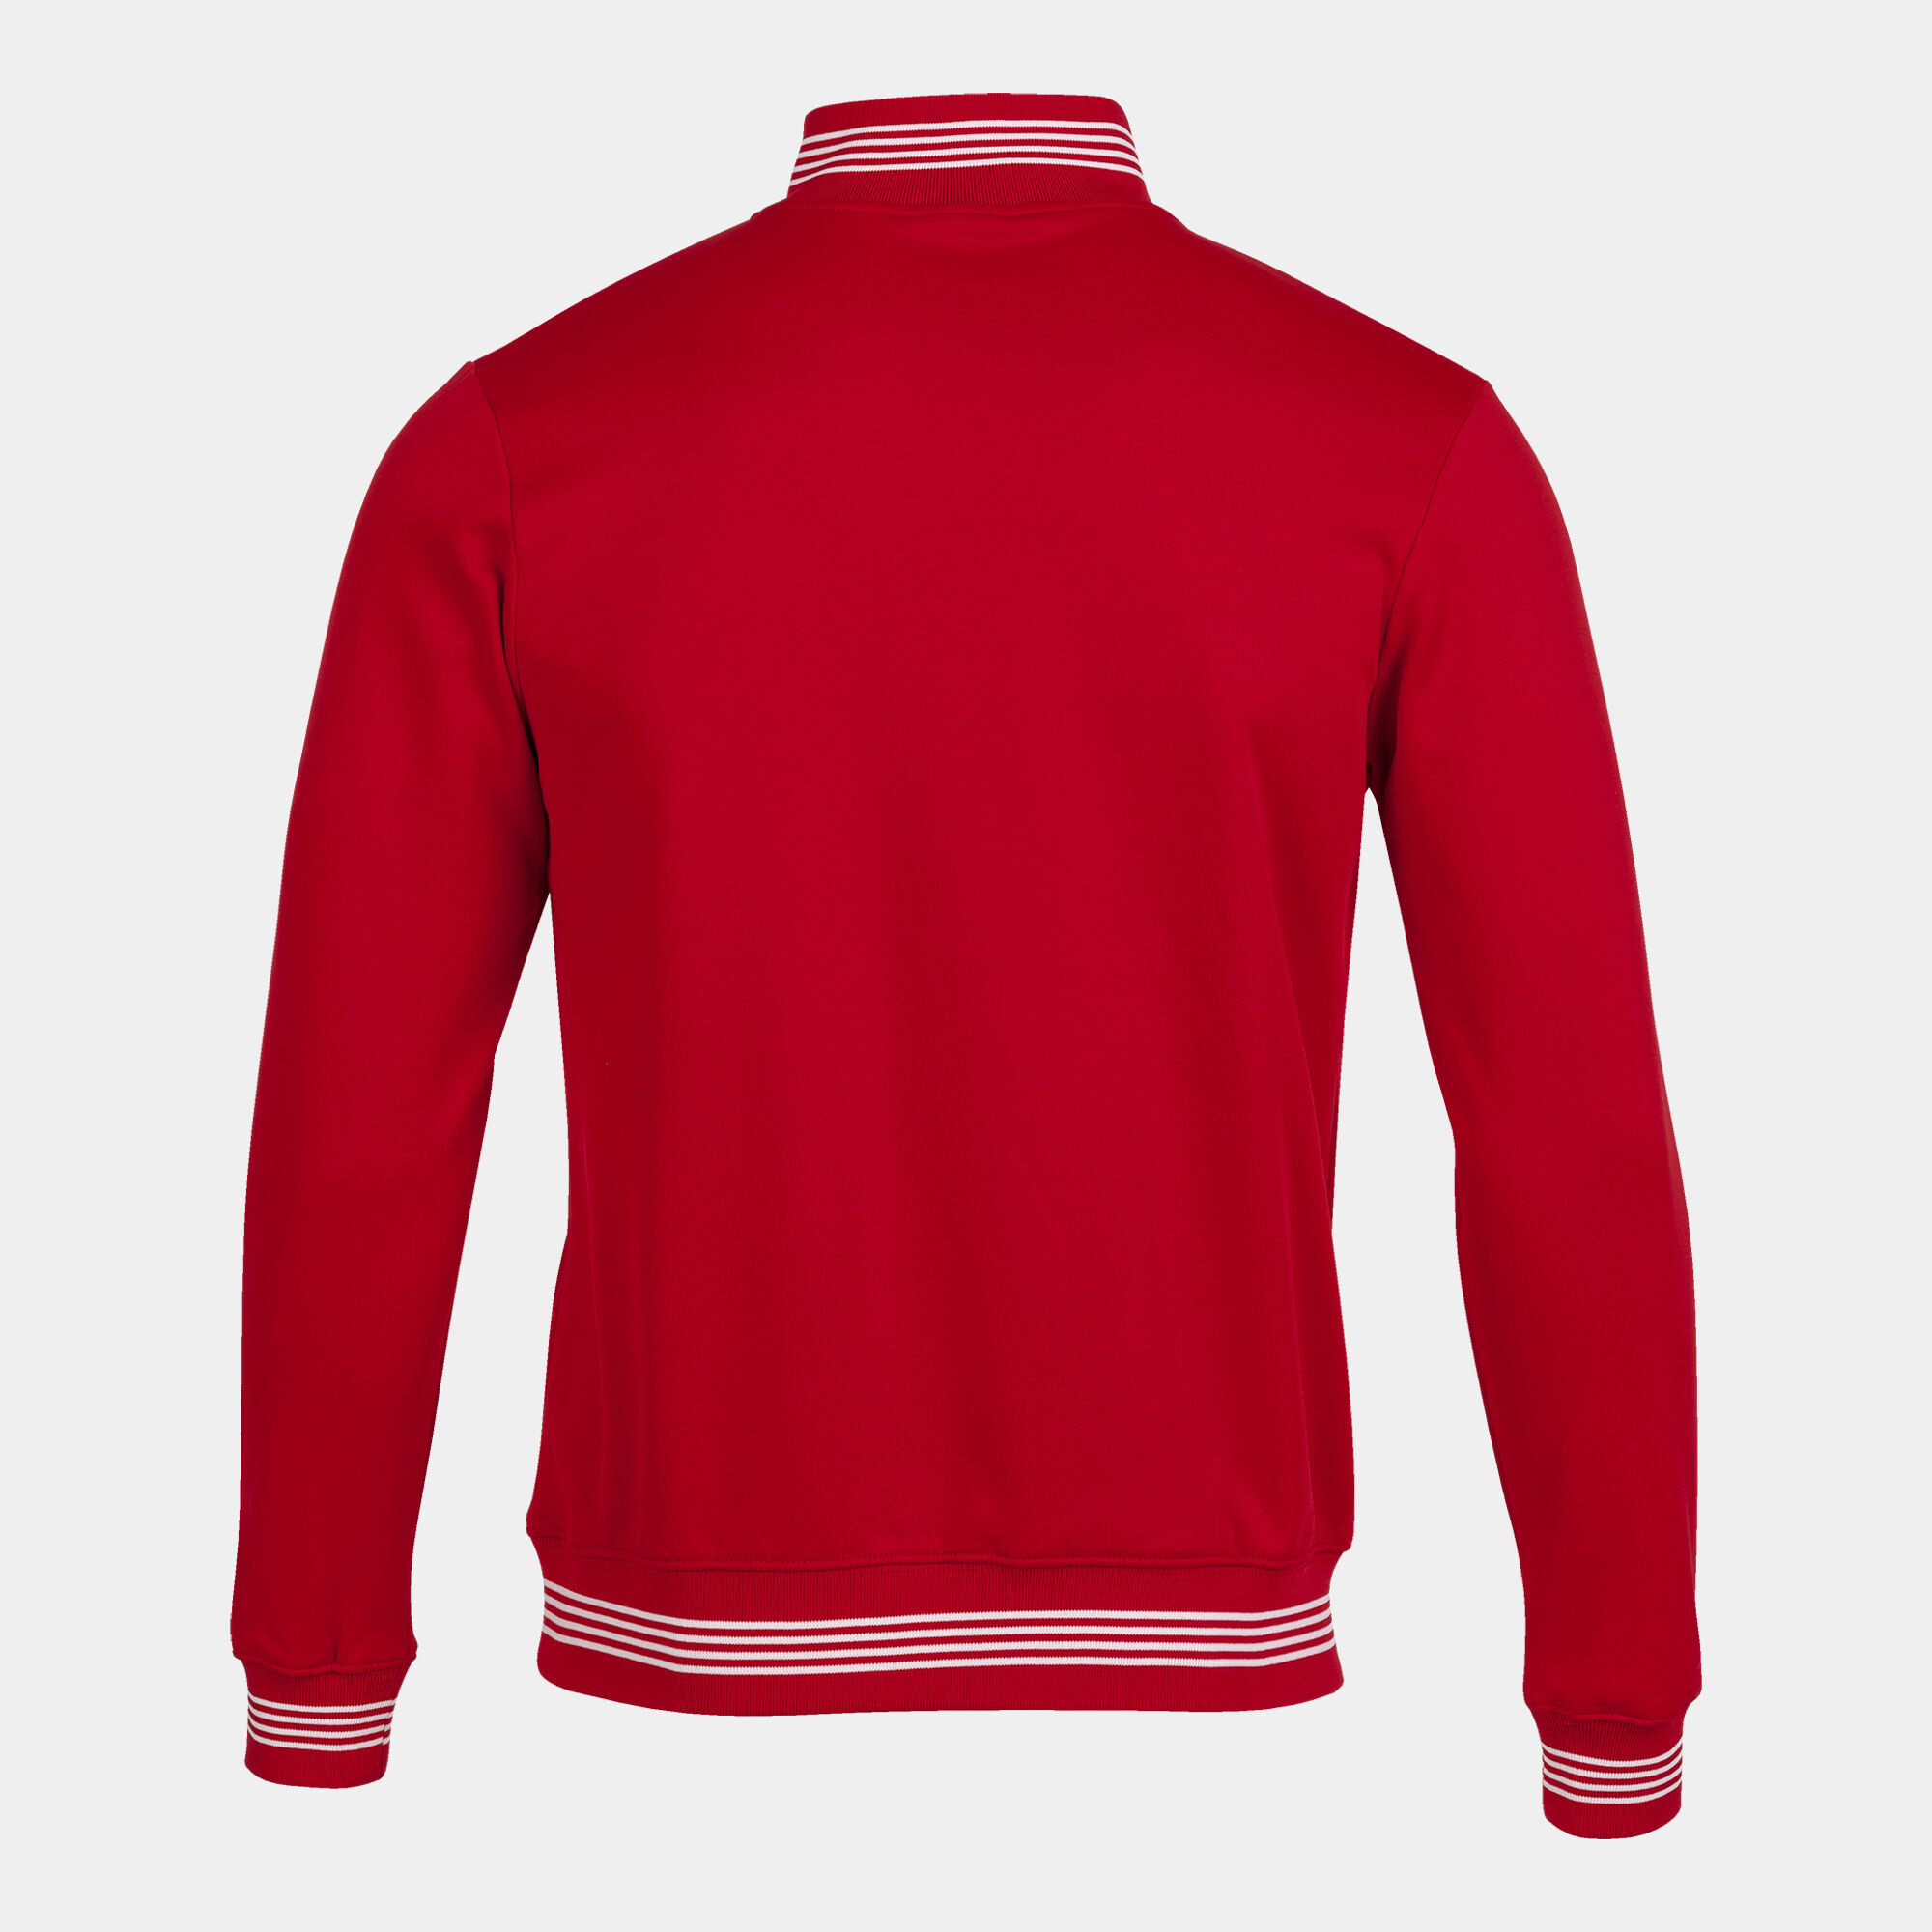 SWEAT-SHIRT HOMME CAMPUS III ROUGE